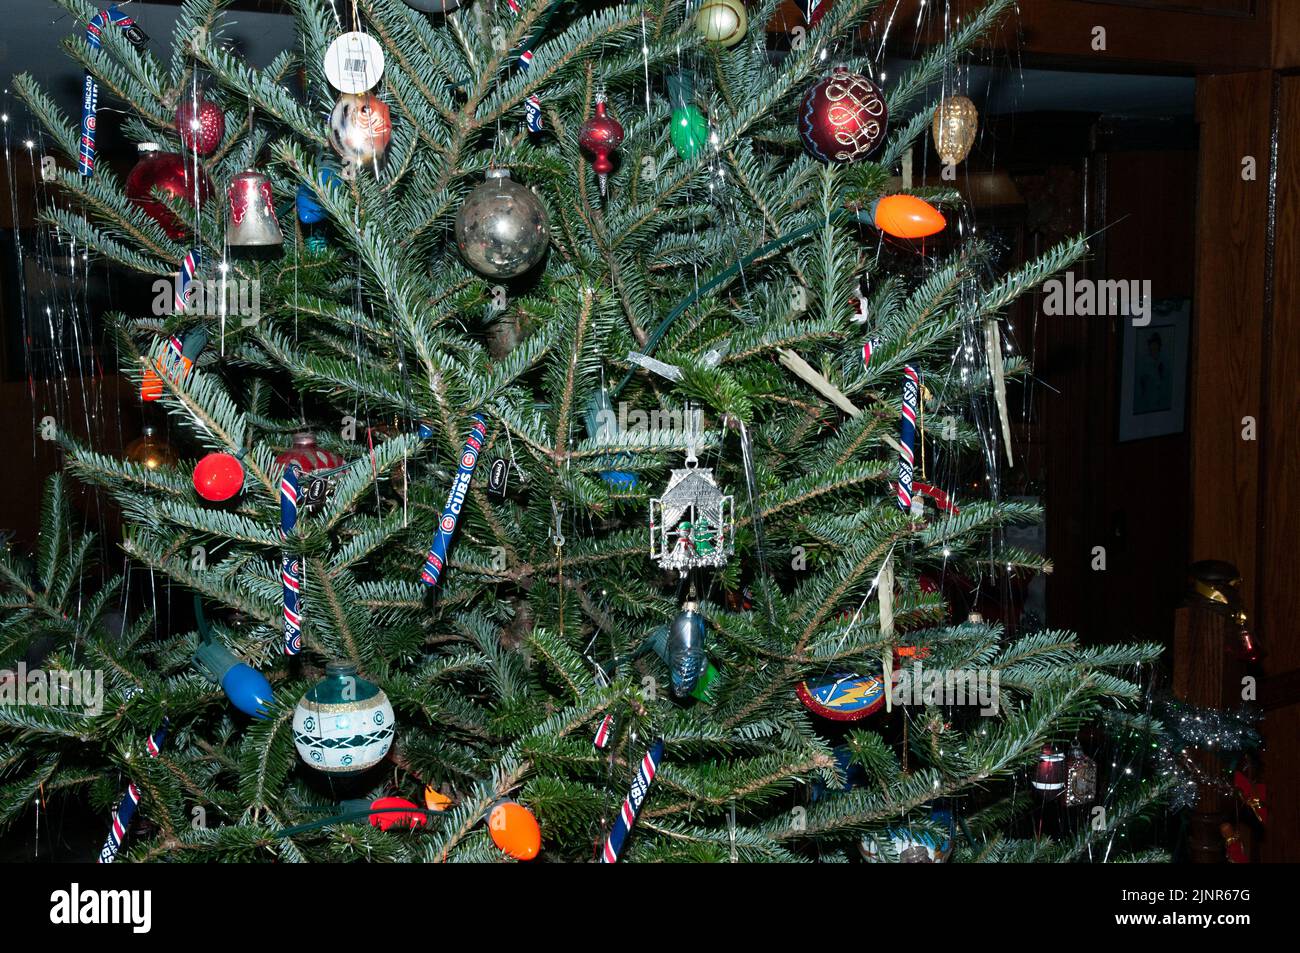 Large Christmas tree in living room. Stock Photo